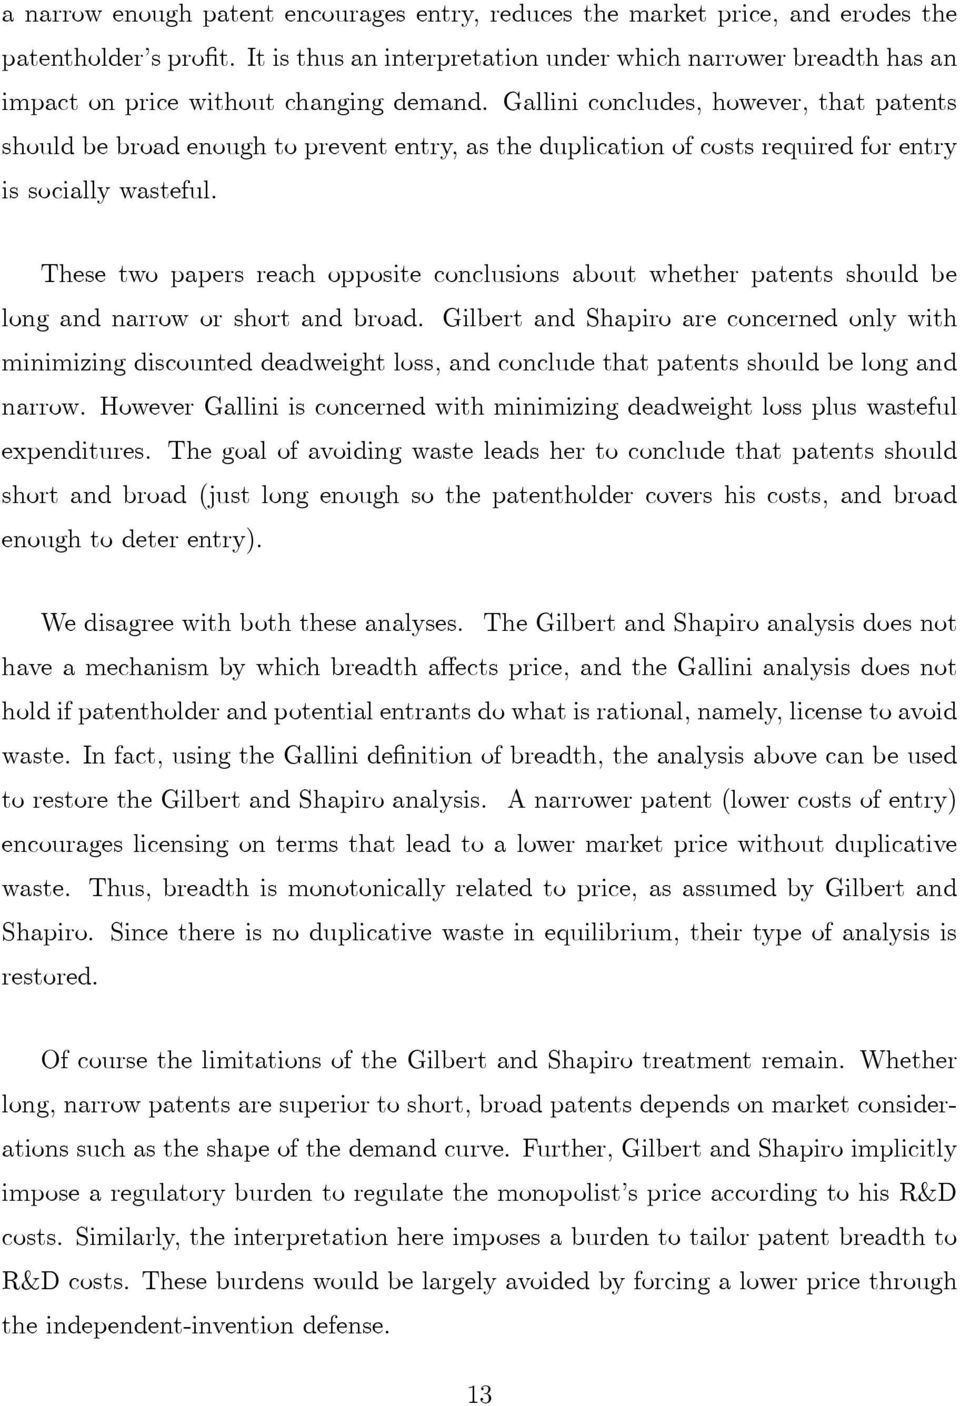 Gallini concludes, however, that patents should be broad enough to prevent entry, as the duplication of costs required for entry is socially wasteful.